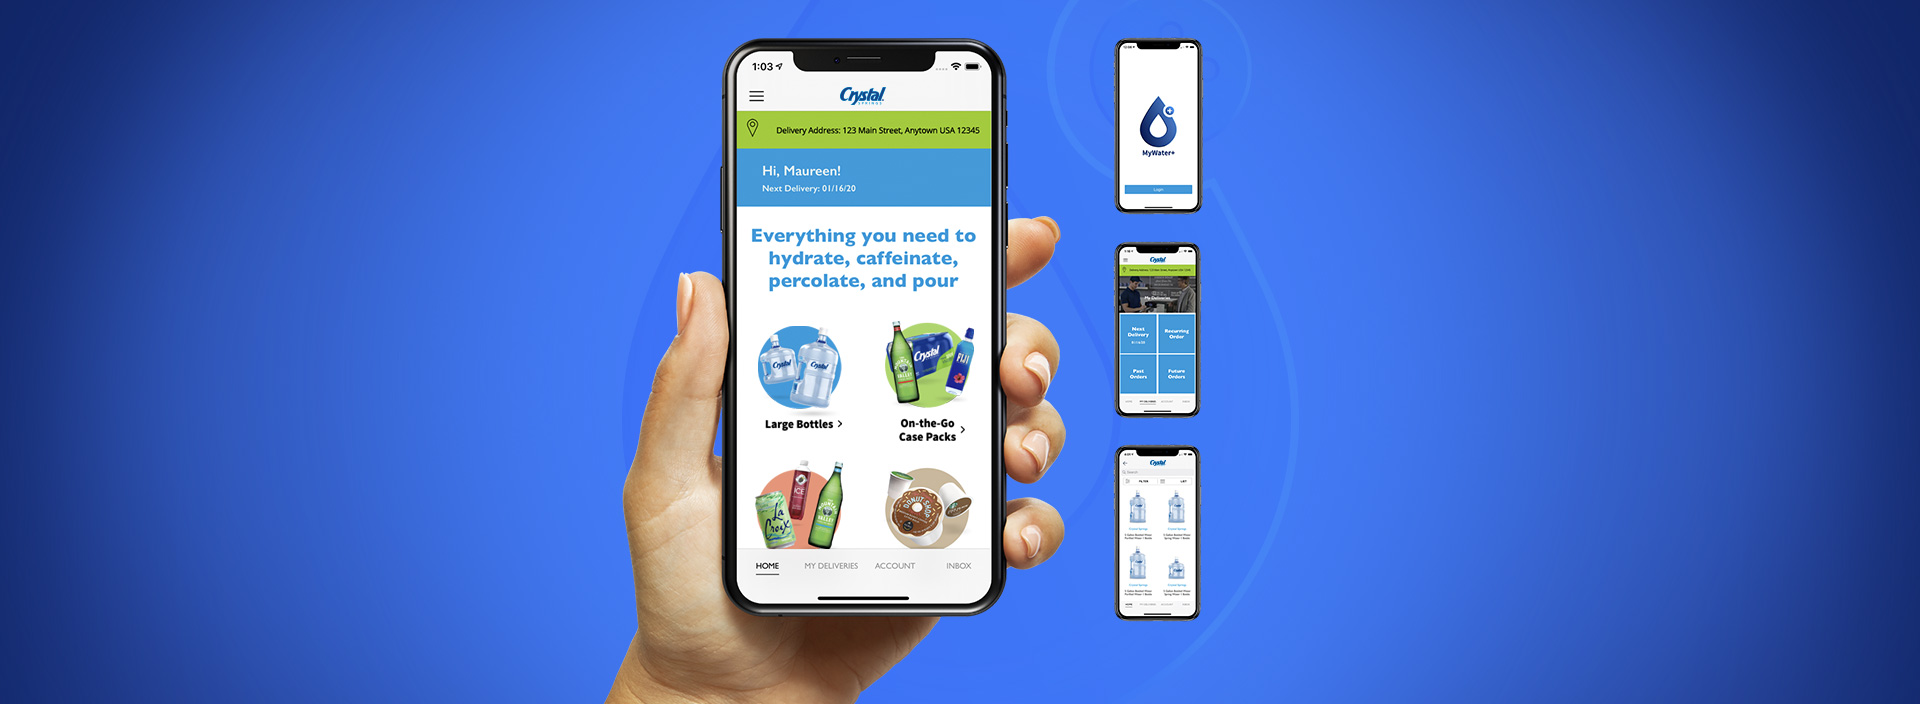 Try Our New App MyWater+